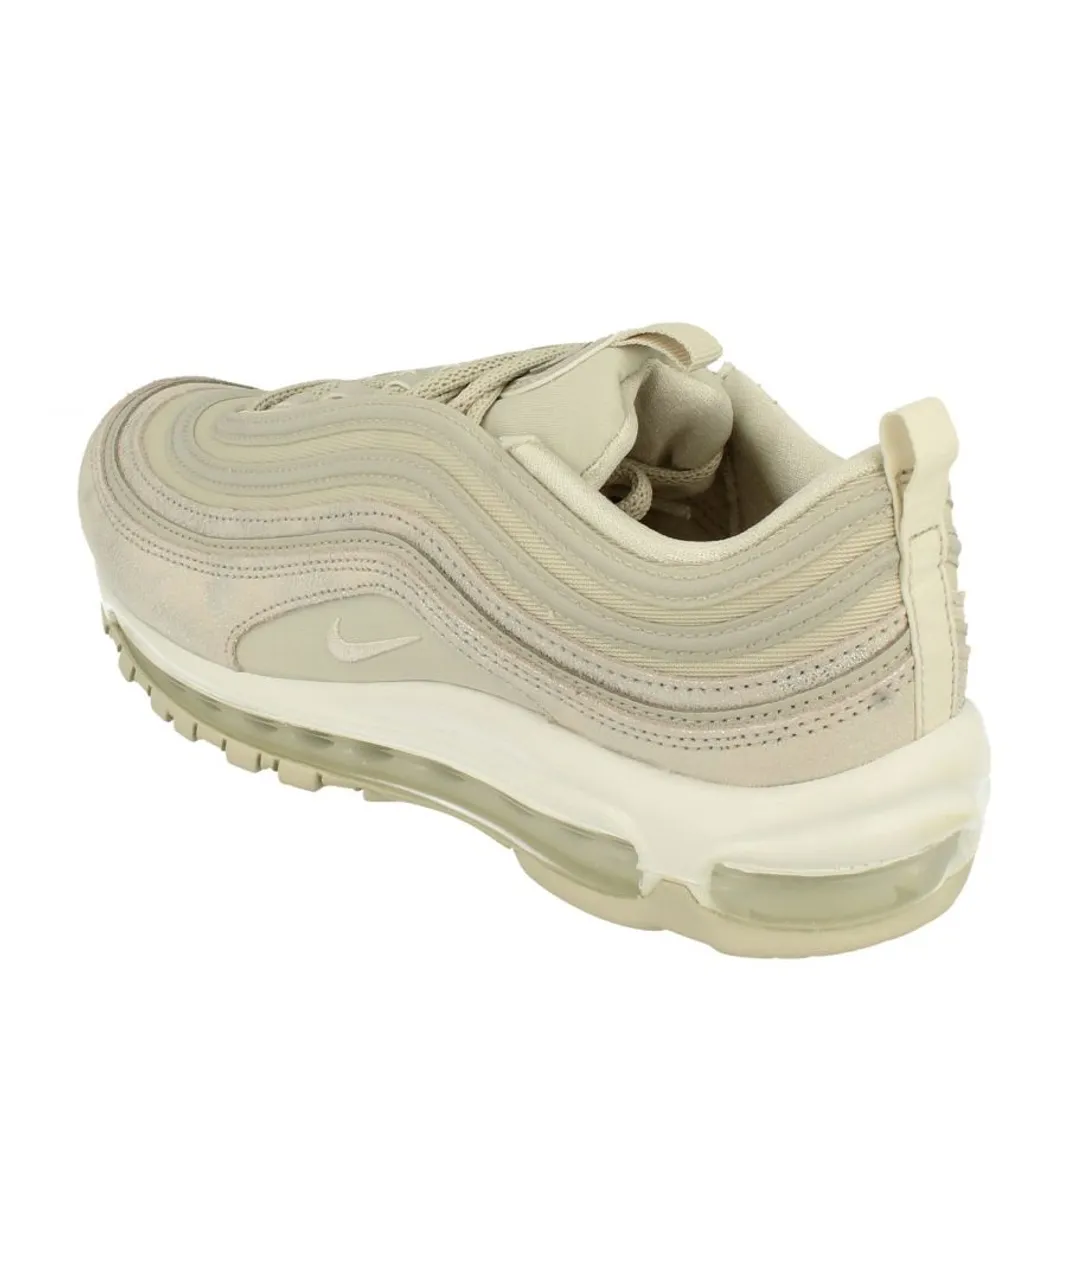 Nike Womens Air Max 97 Pink Trainers